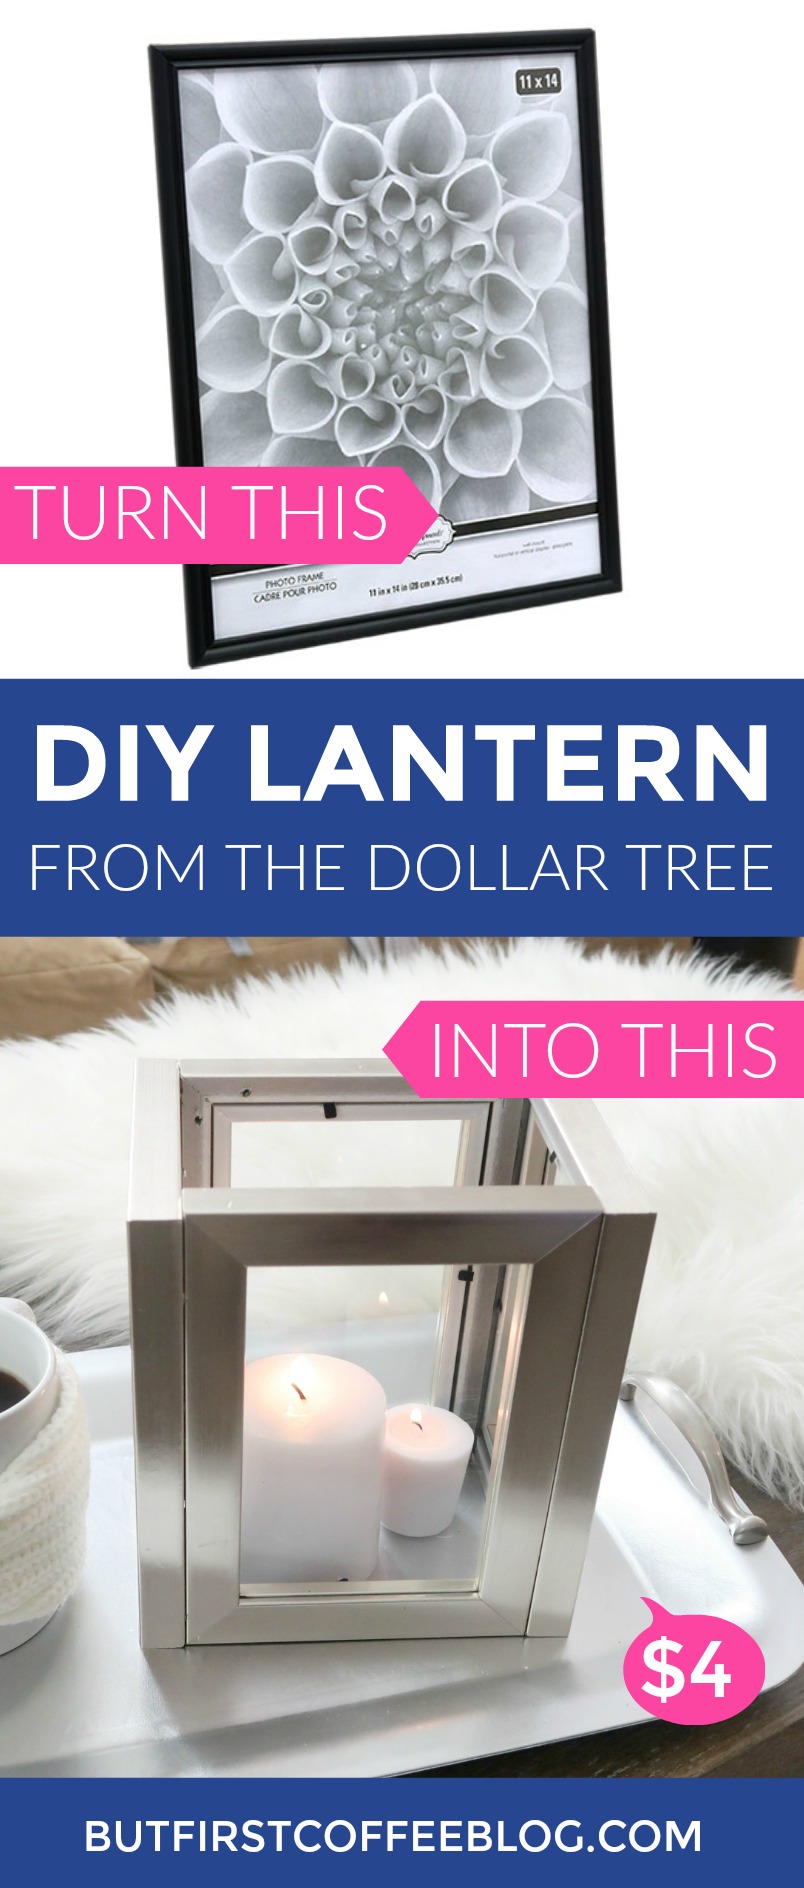 DIY Candle Lantern From the Dollar Tree | How to Make a DIY Picture Frame Lantern